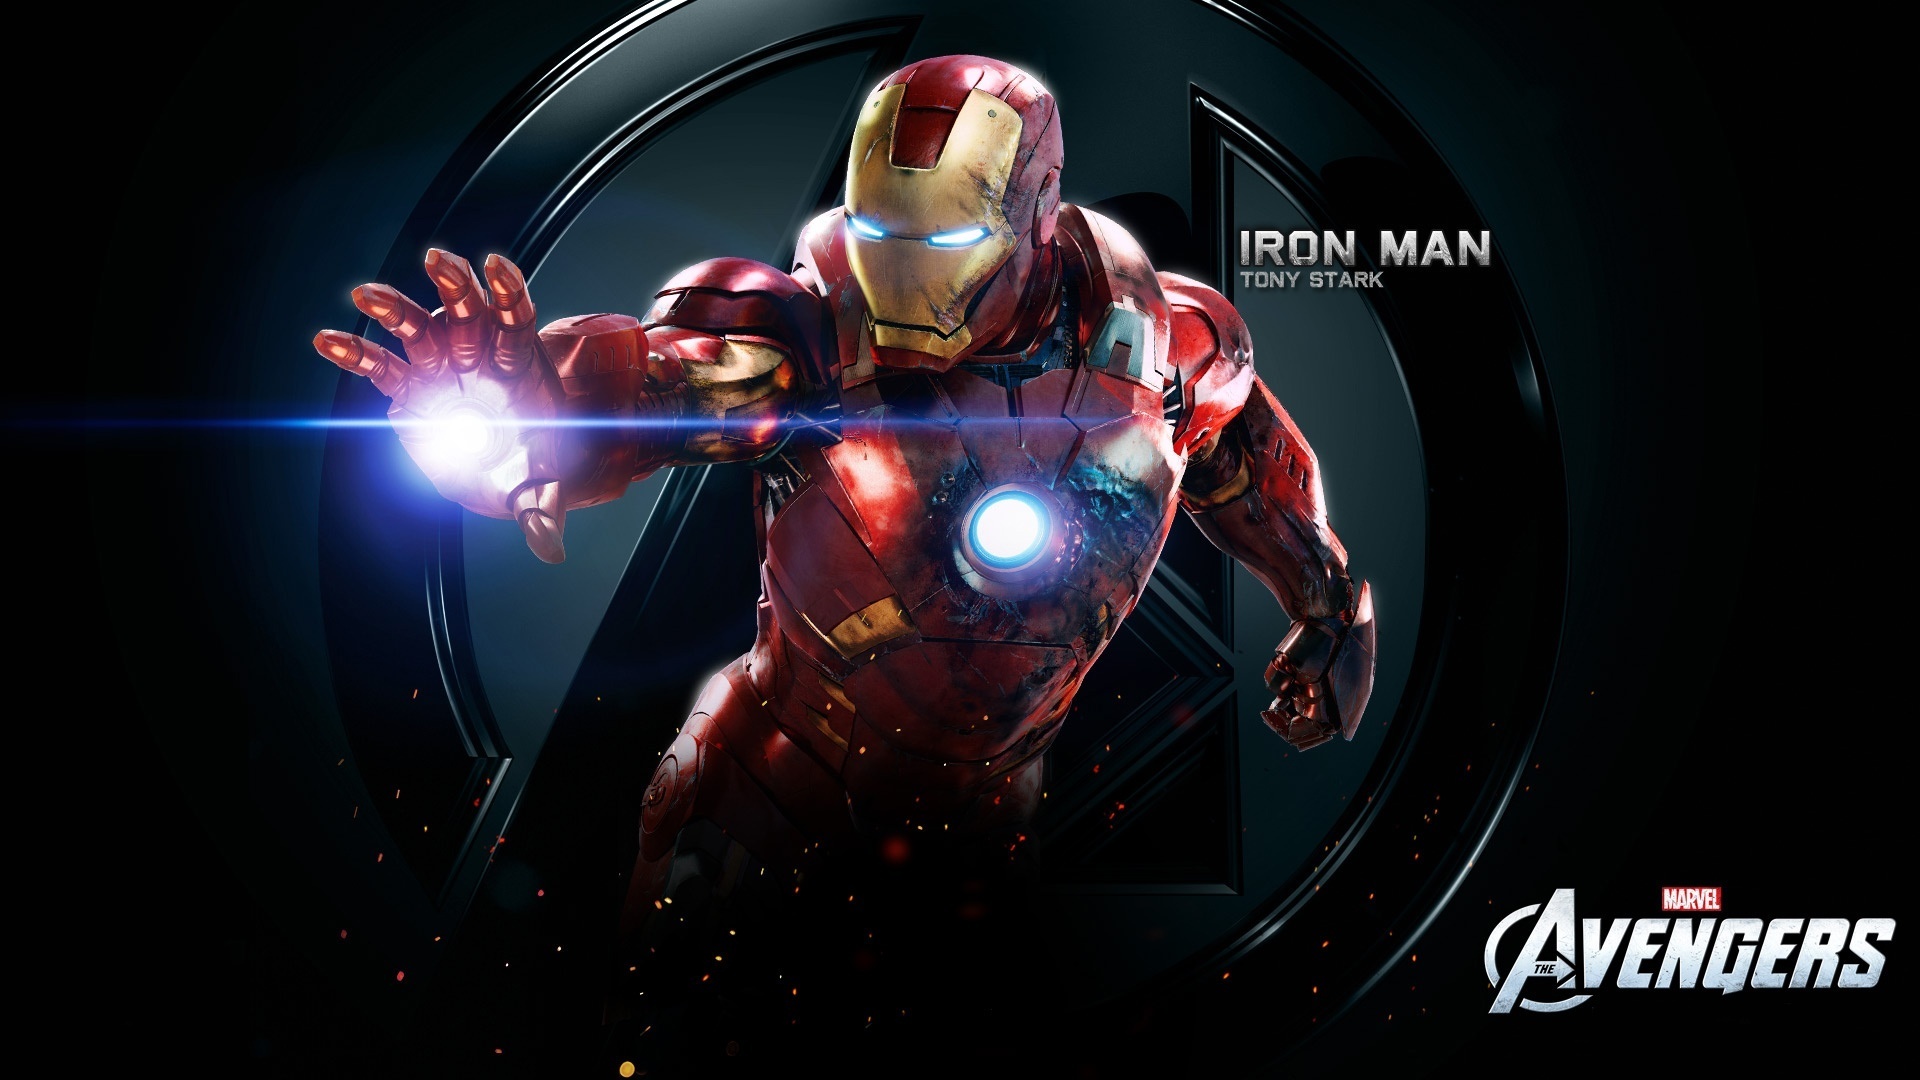 Download 1920x1080 Wallpaper Iron Man 4k 8k Suit Fight Full Hd Hdtv  Fhd 1080p 1920x1080 Hd Image Background 15654